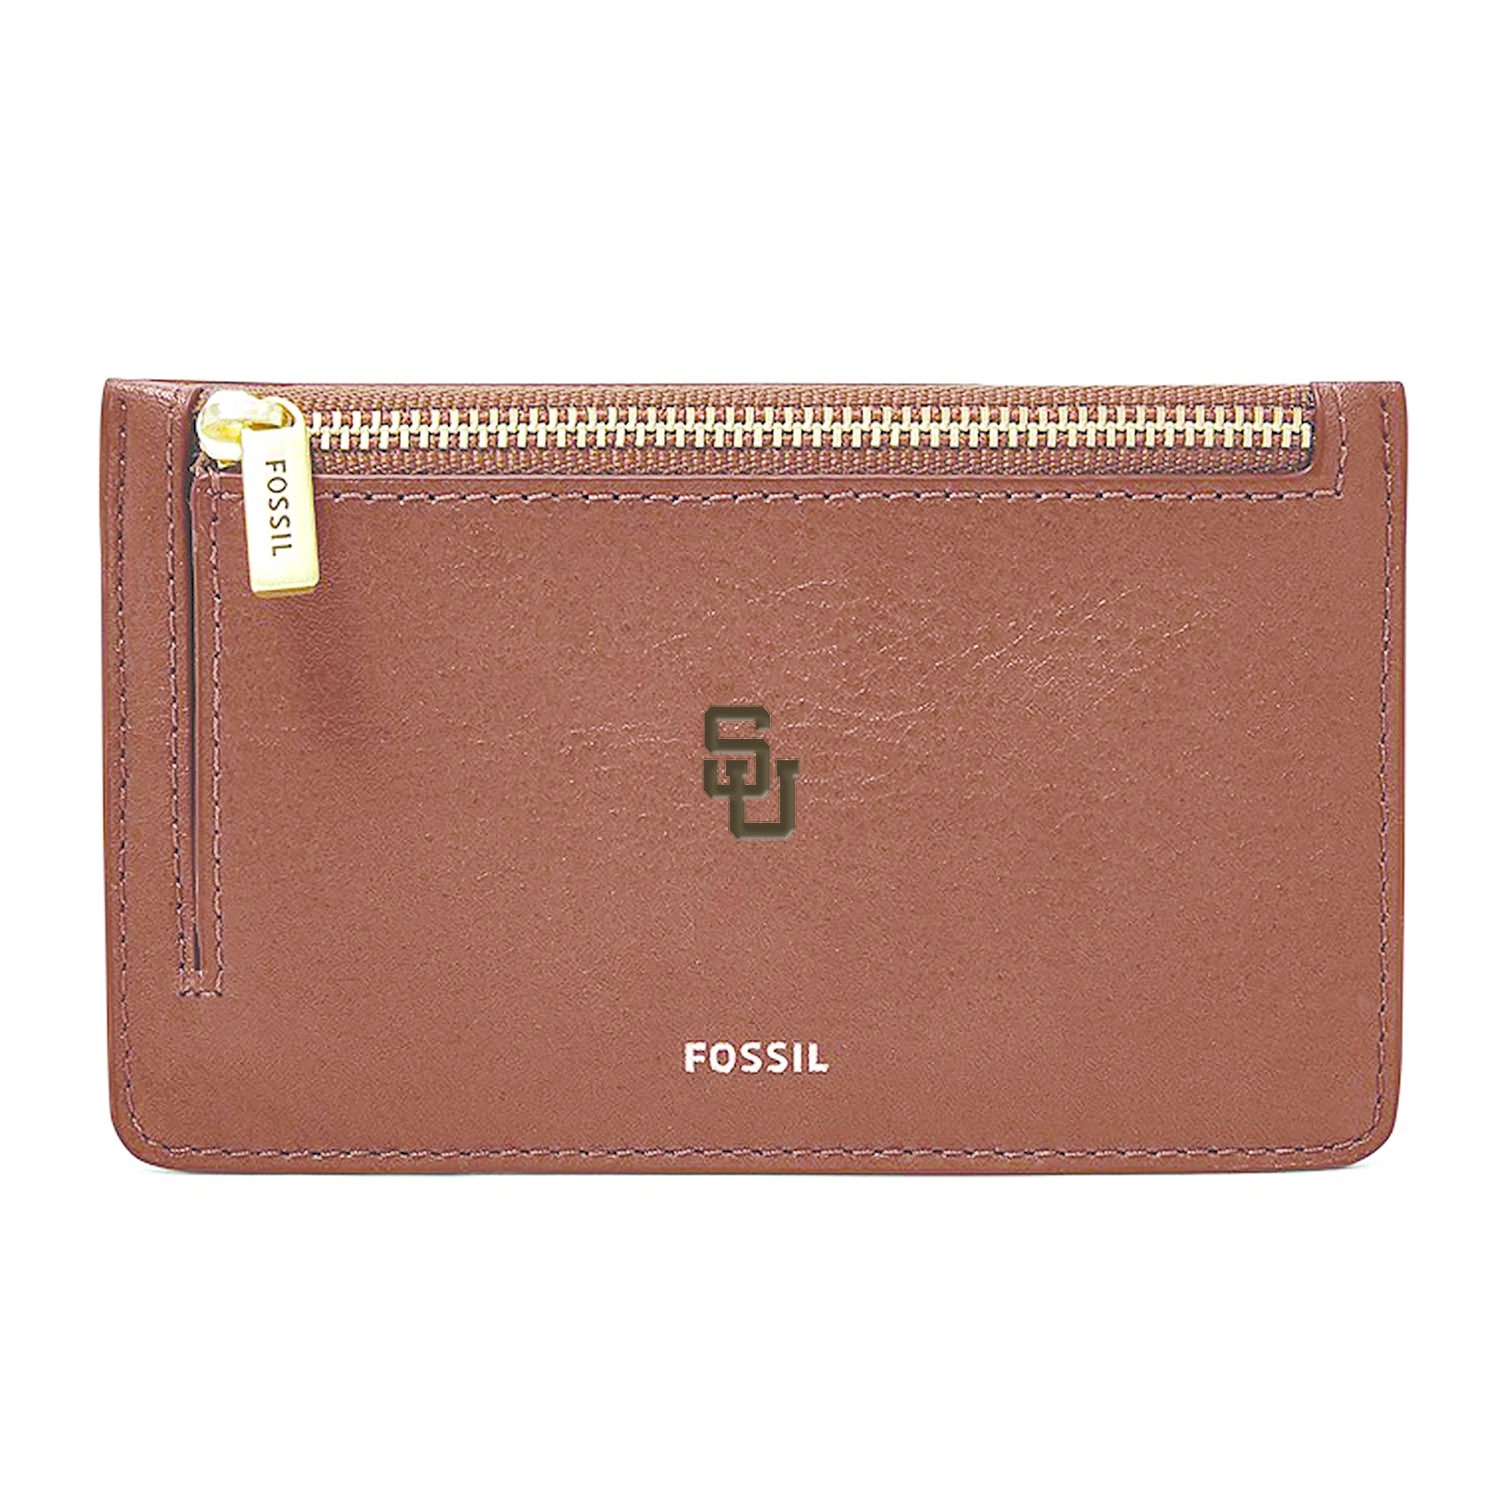 Buy Fossil Black Leather Coin Purse - Clutches for Women 1508662 | Myntra